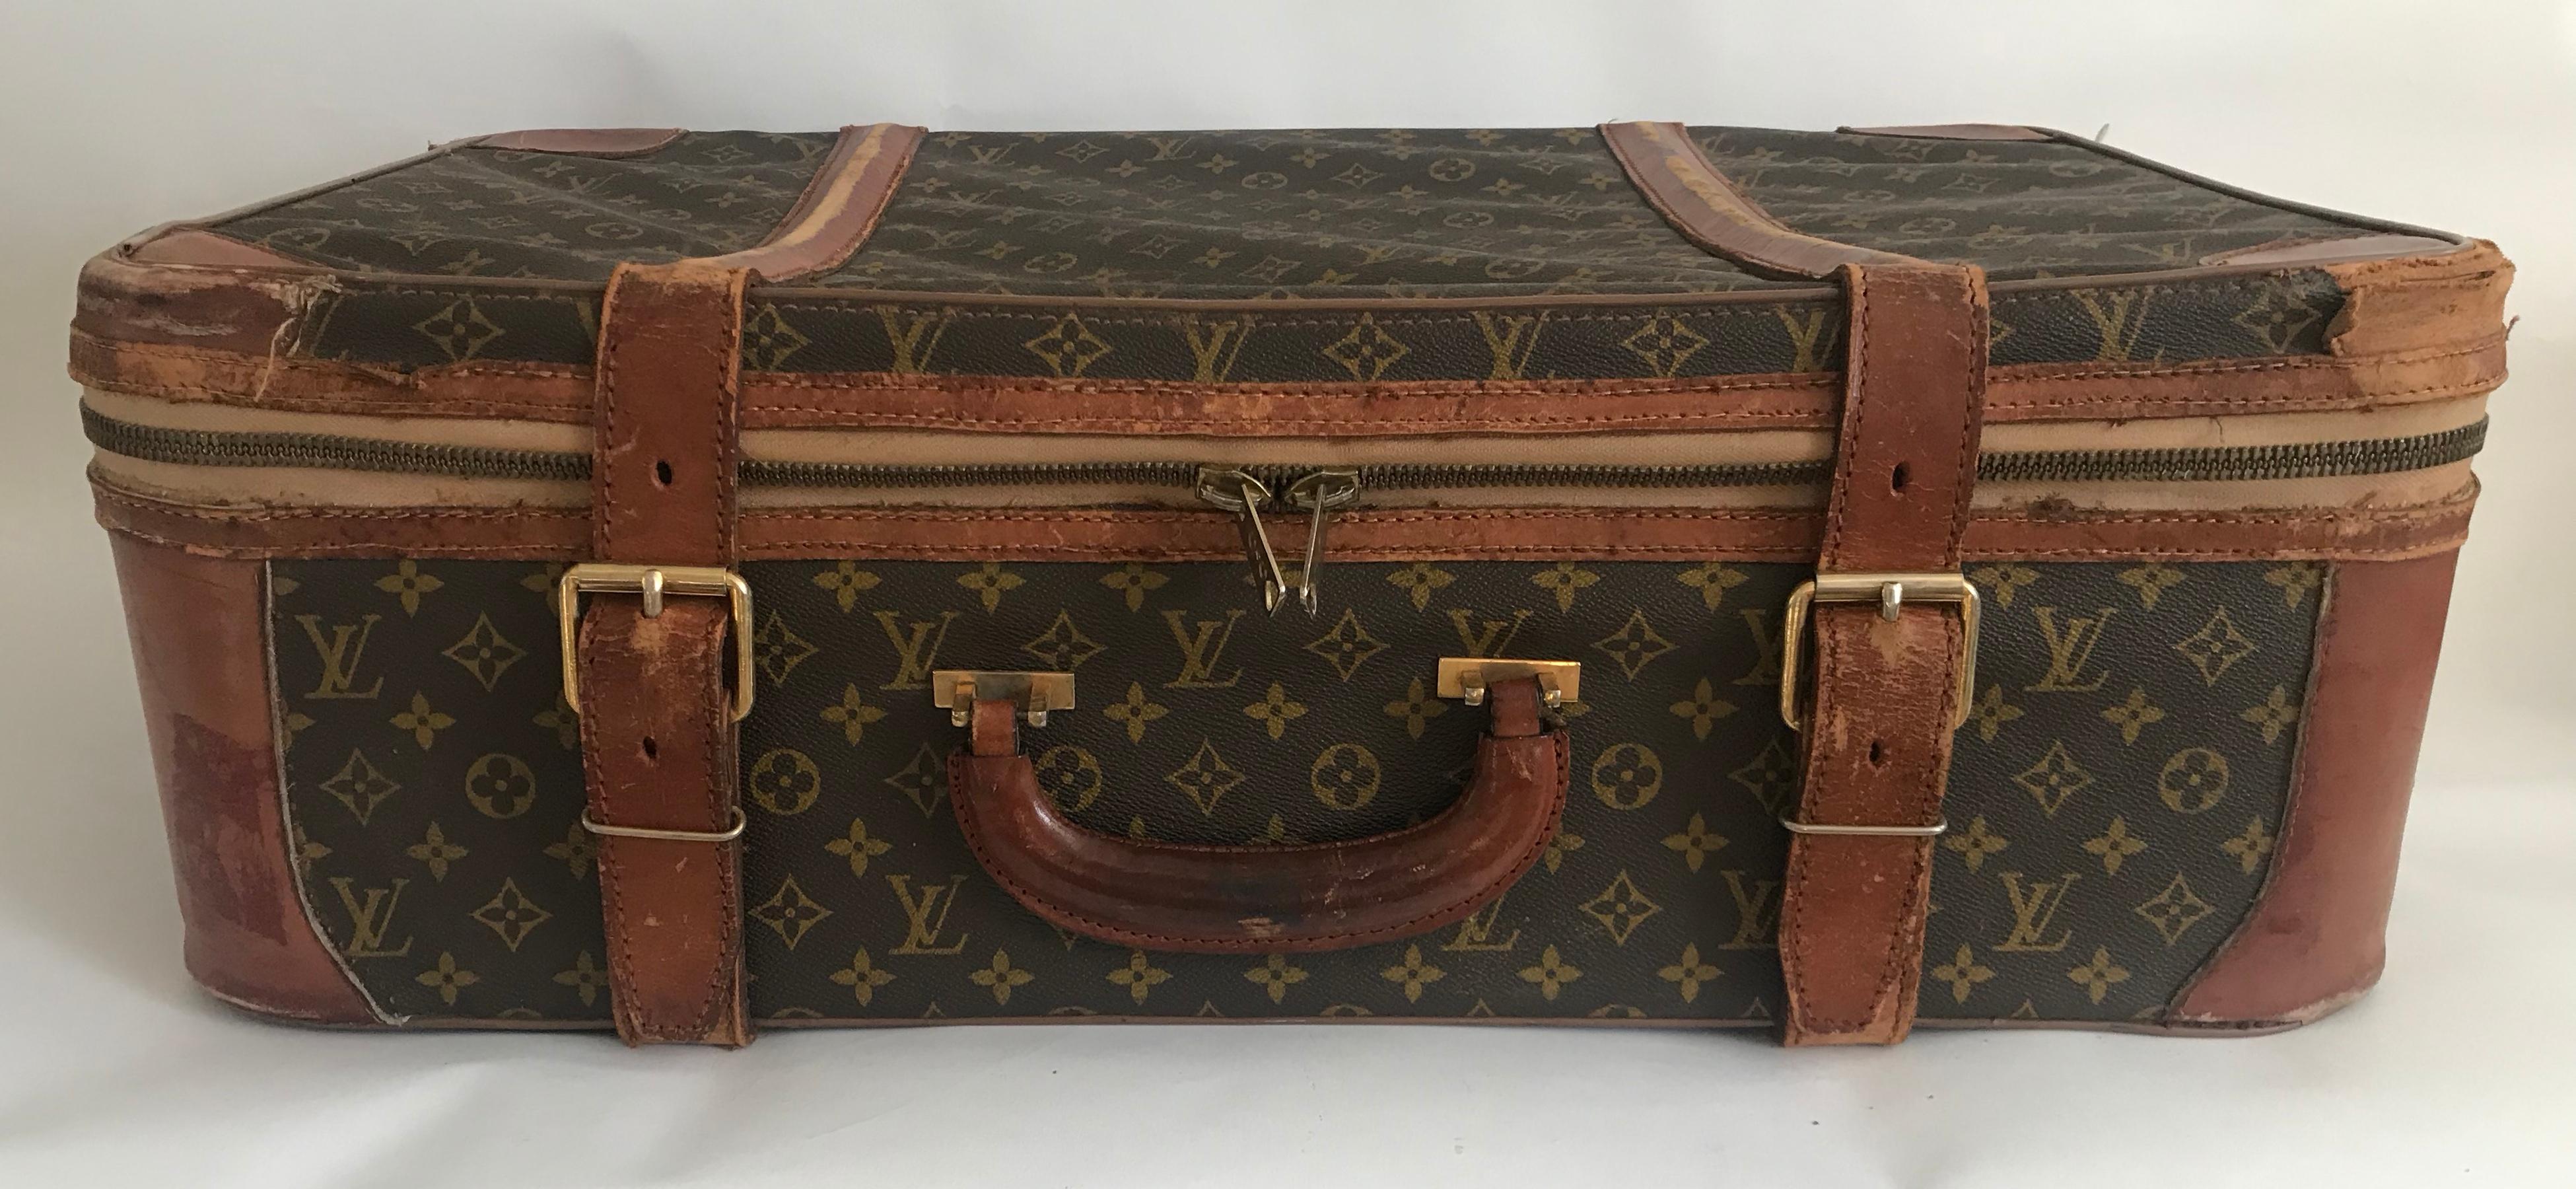 Brown and beige leather and canvas monogram suitcase from Louis Vuitton Vintage featuring a round top handle, a hanging luggage tag, buckle fastenings, a monogram print, leather trims, elasticated internal side pockets and internal buckle straps.
 